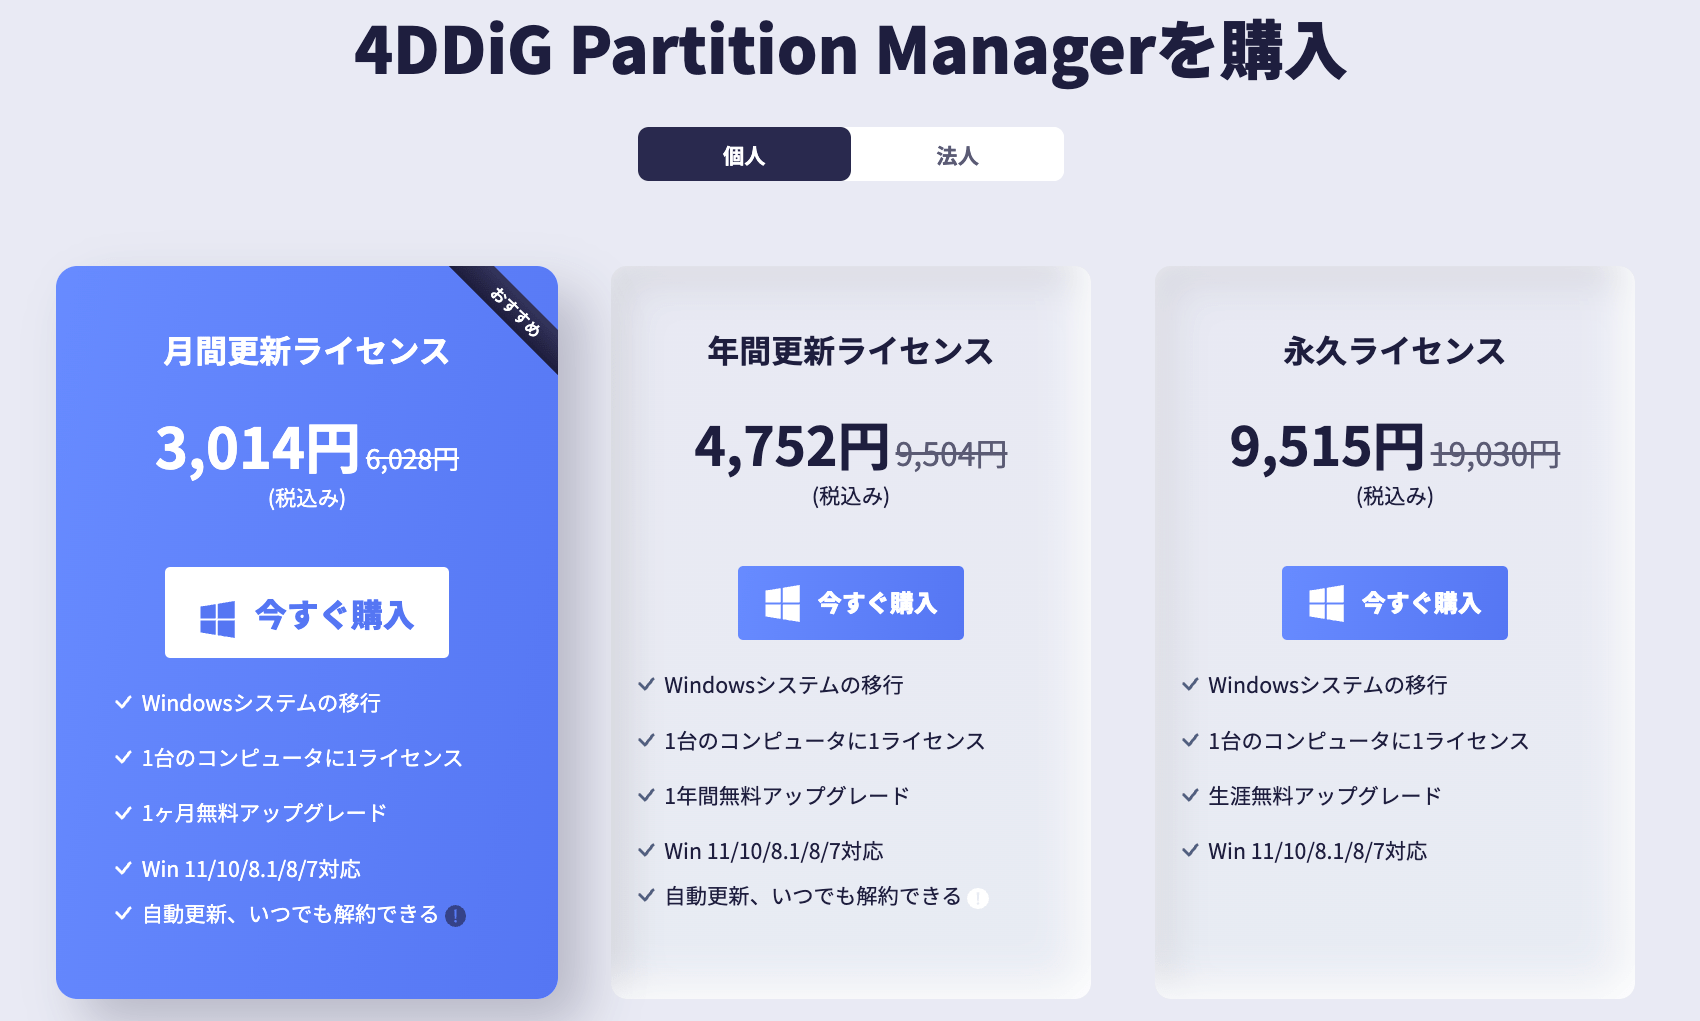 4DDiG Partition Managerセール